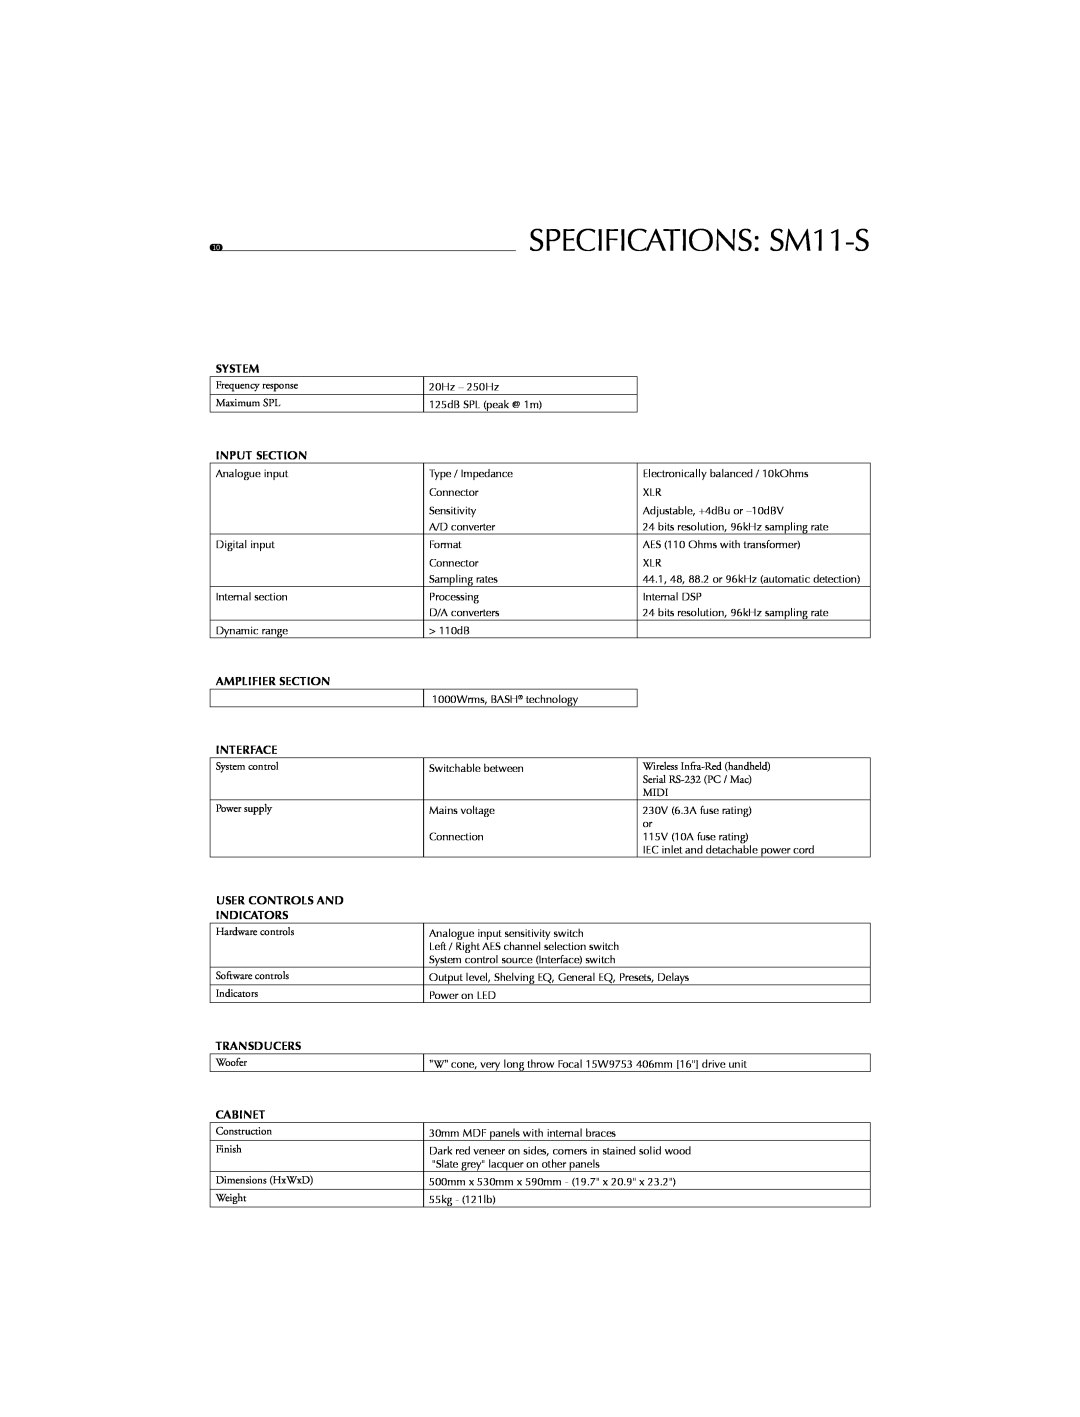 Focal SPECIFICATIONS SM11-S, System, Input Section, Amplifier Section, Interface, User Controls And Indicators, Cabinet 